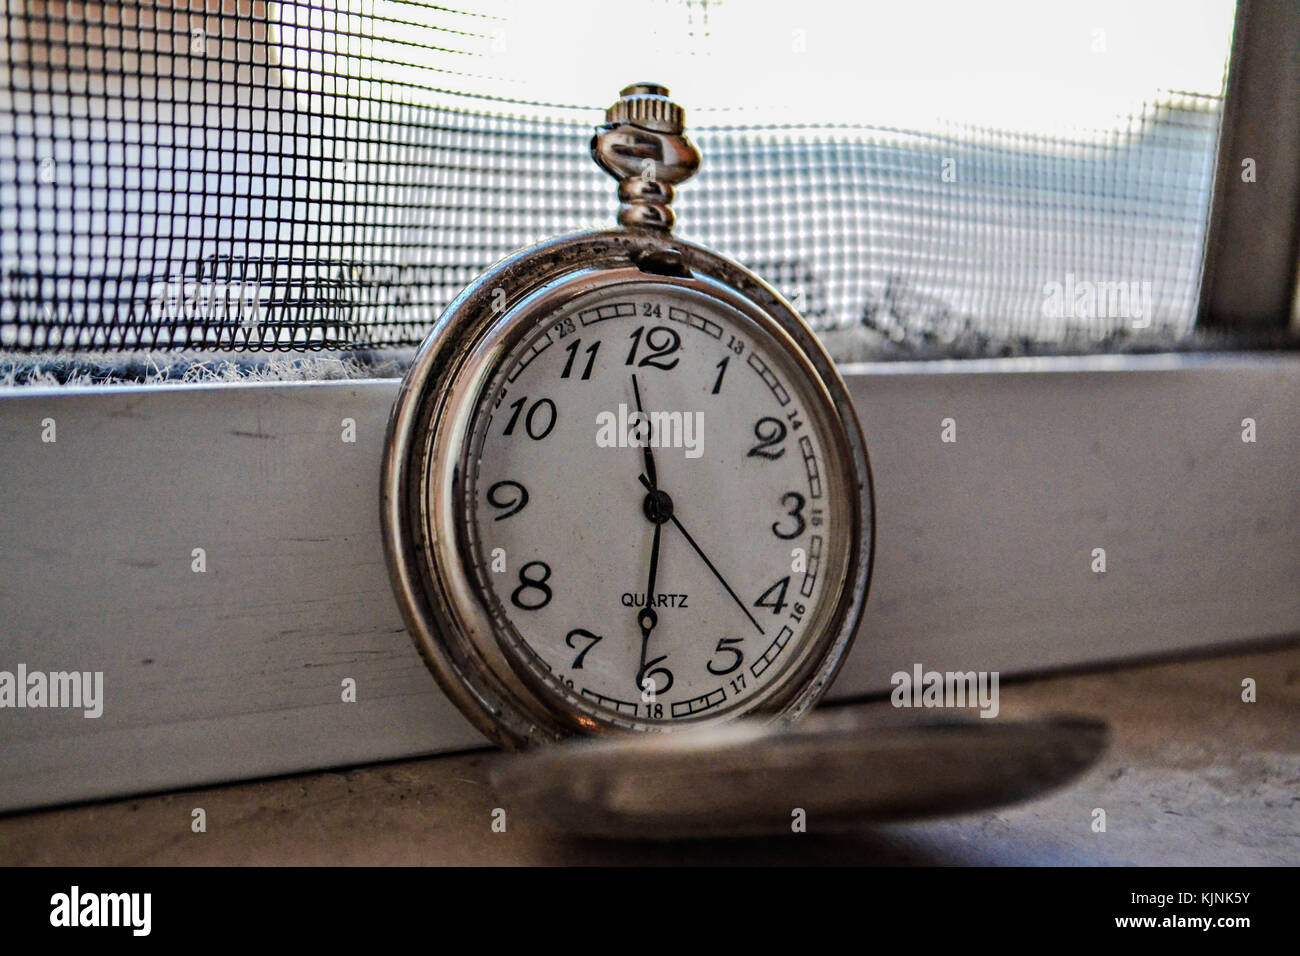 Time for Waiting with Vintage Pocket Watch by the window,Image for Deadline Time Concept Stock Photo